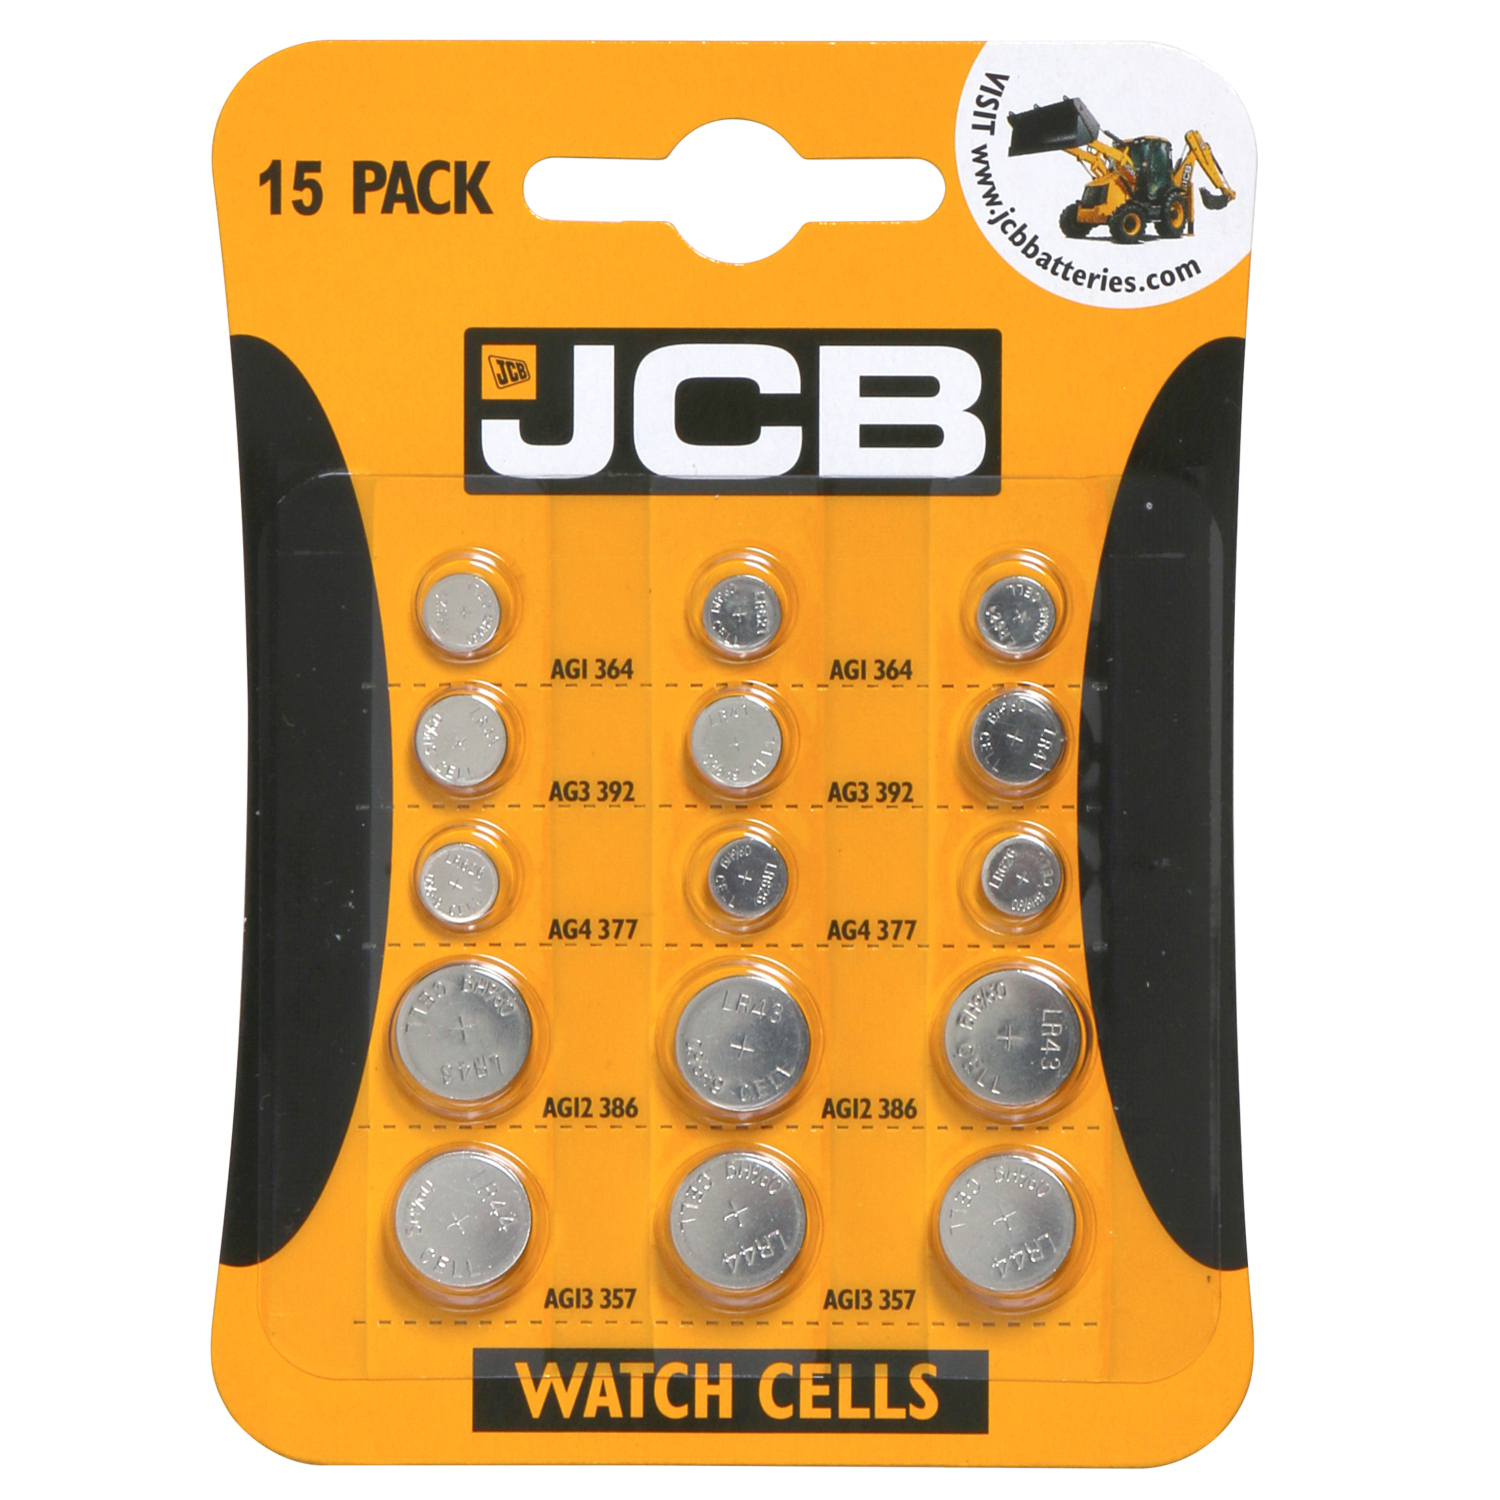 JCB Watch Cell Multi 15 Pack Image